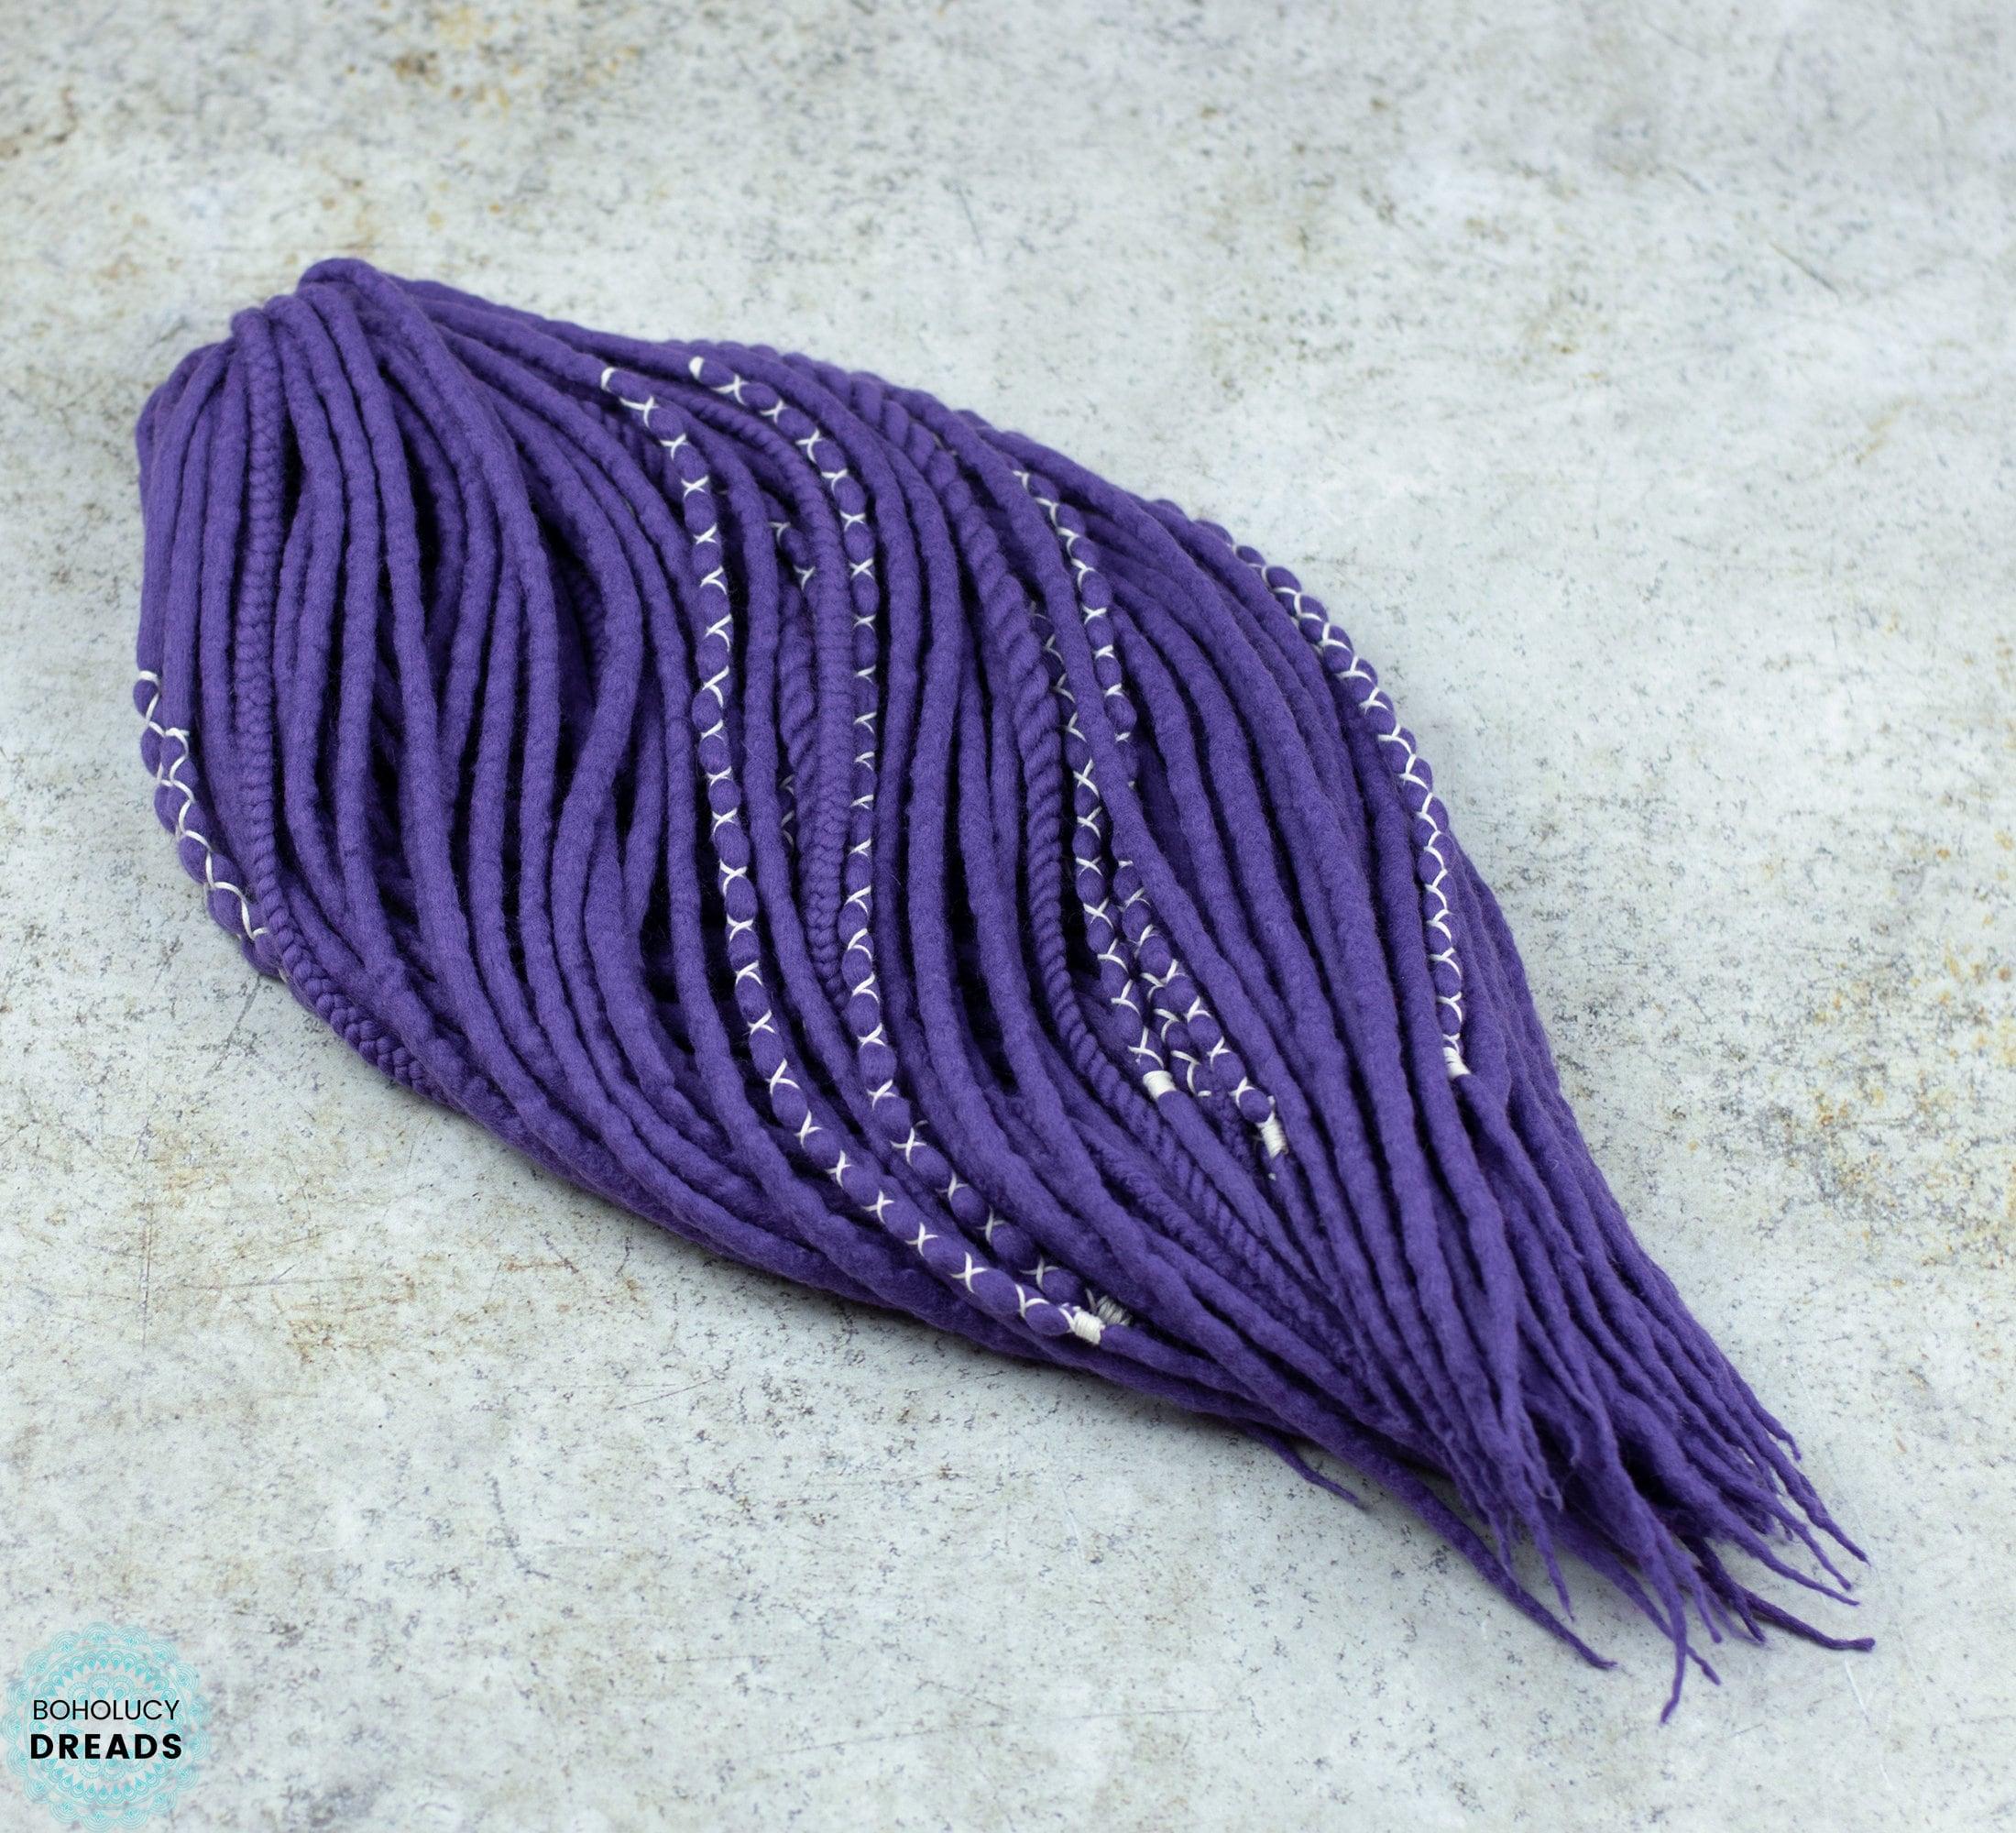 Wisteria wool hair extensions